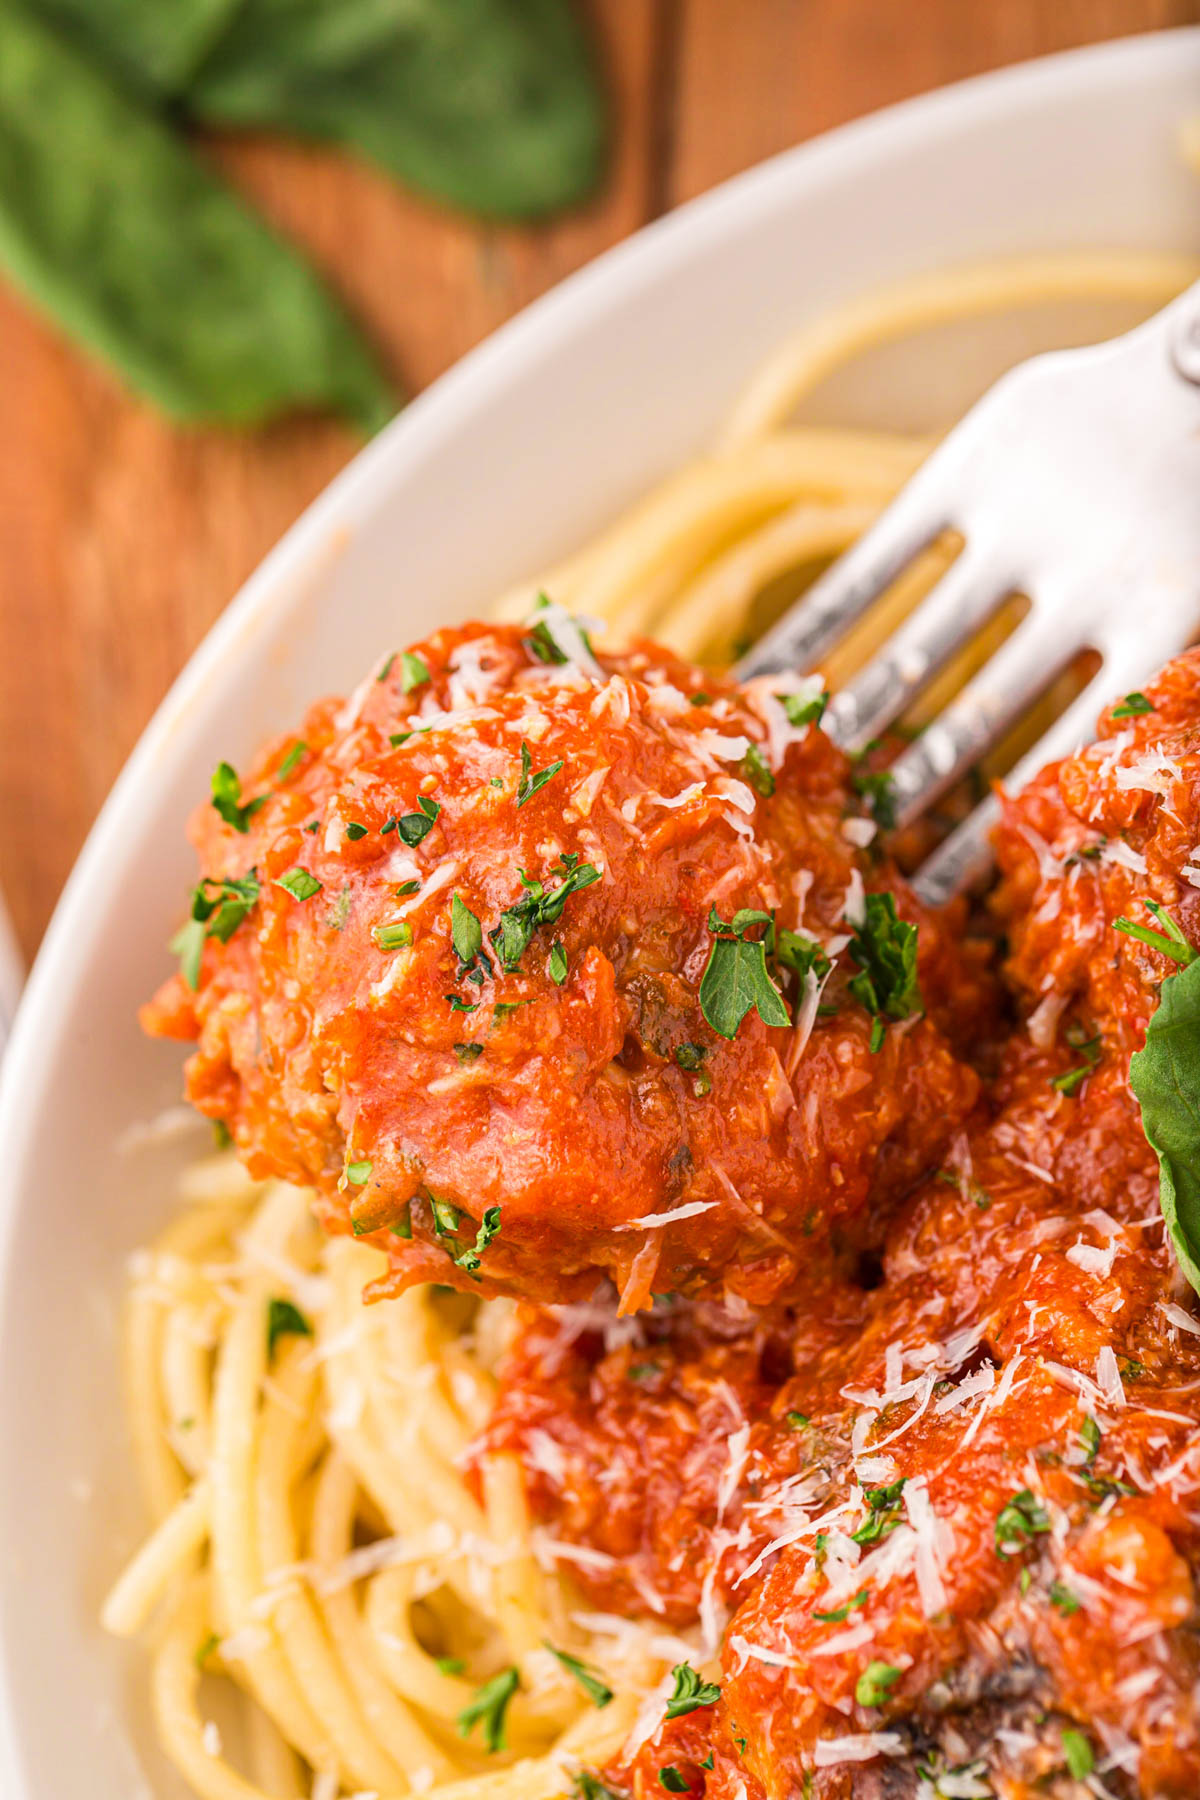 An image of a large meatball in marinara sauce.